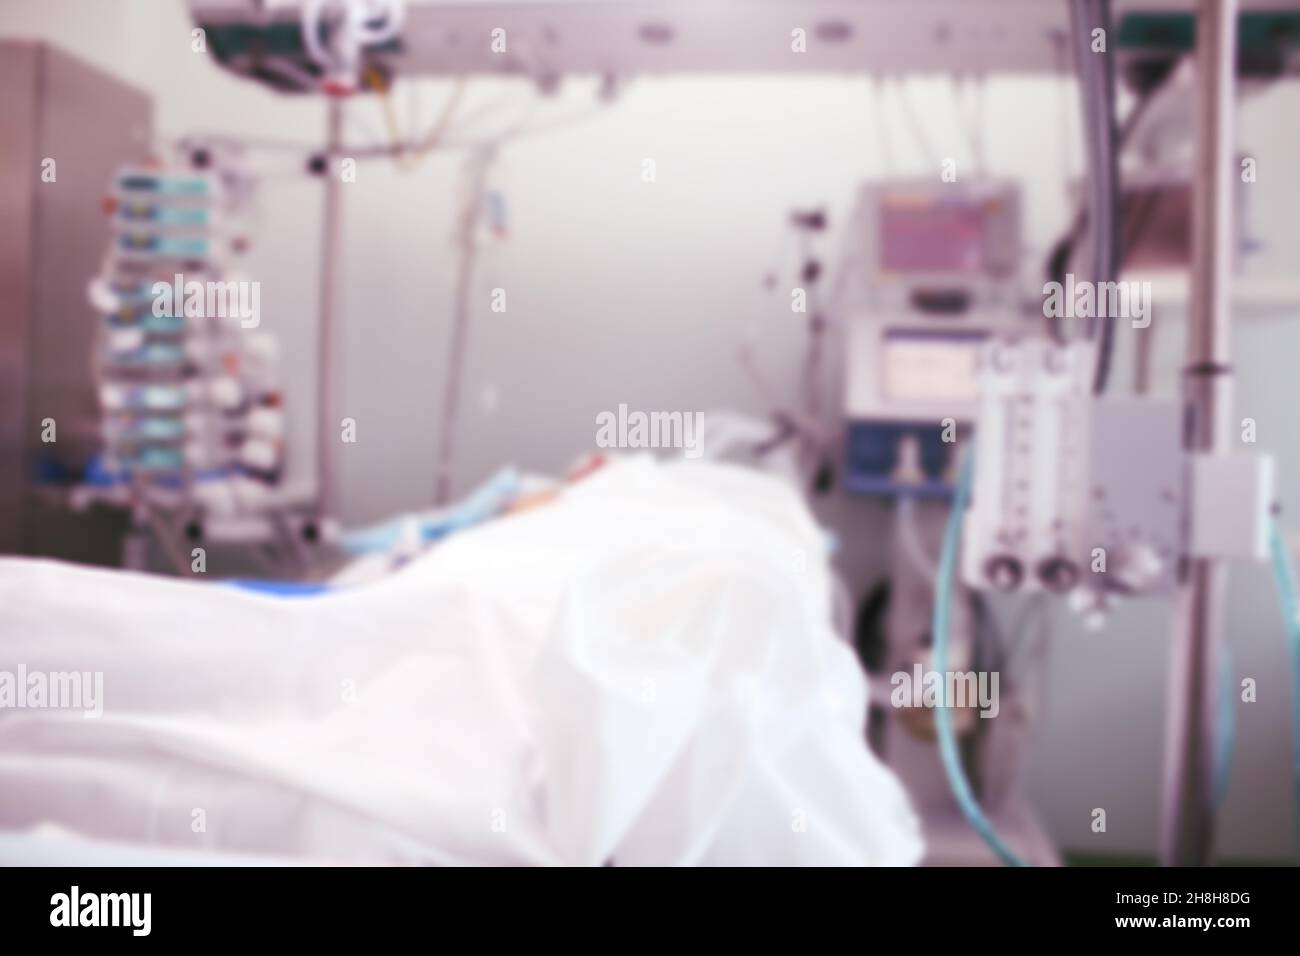 Patient in the intensive care unit under 24-hour medical supervision, unfocused background. Stock Photo